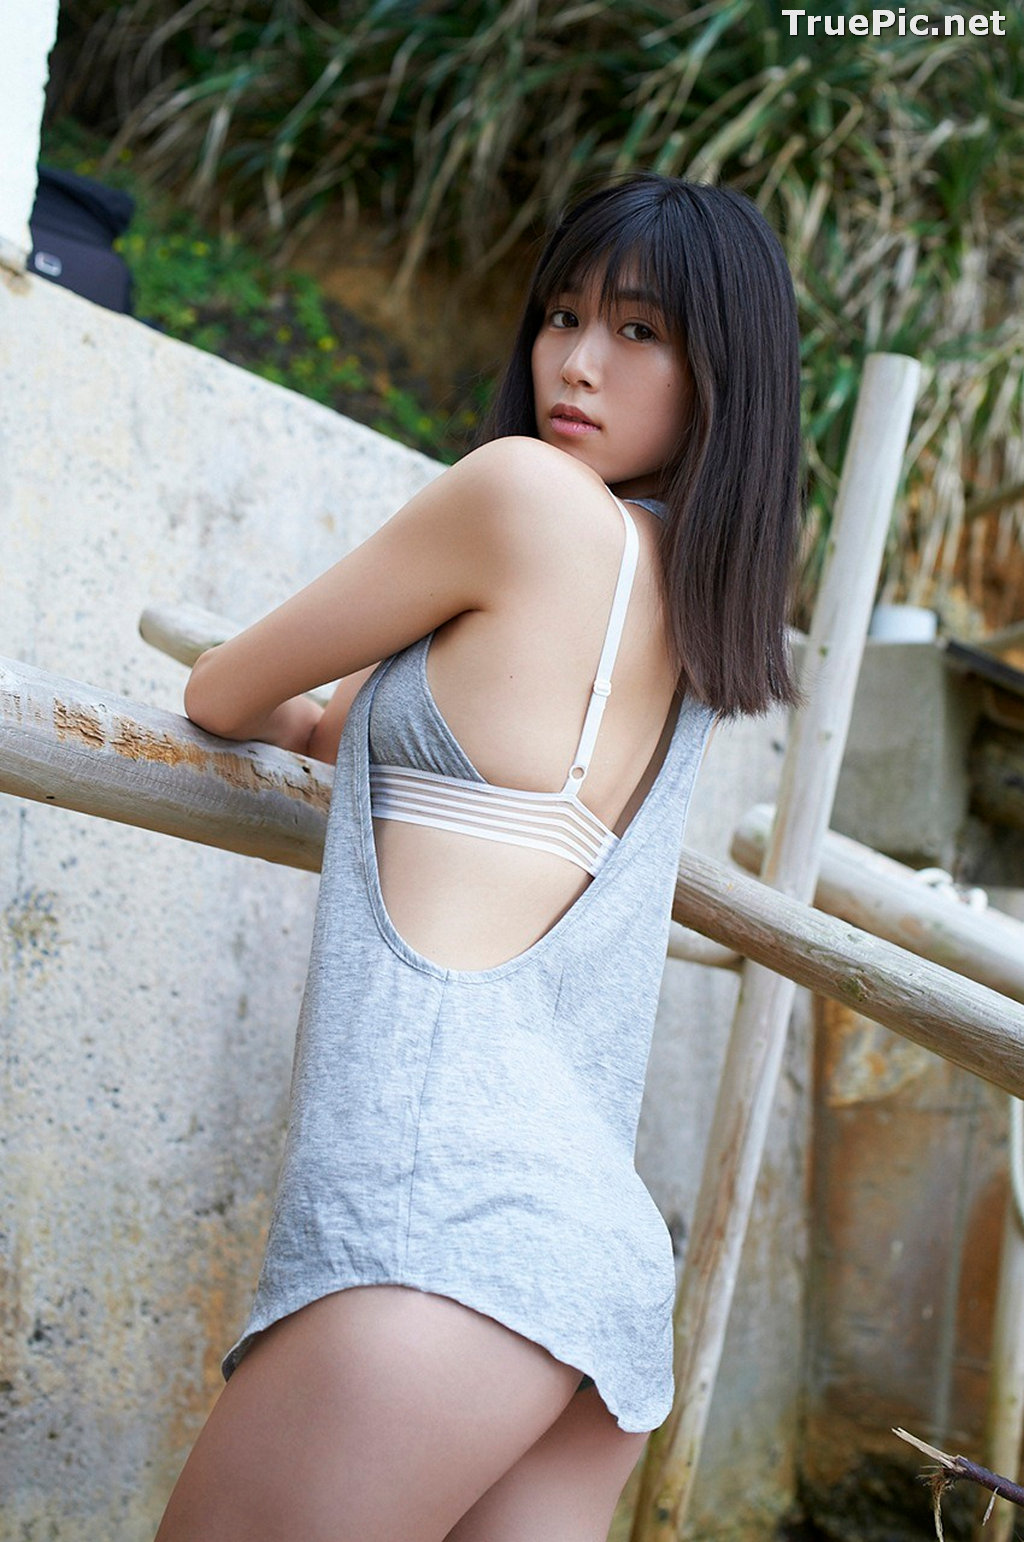 ImageJapanese Gravure Idol and Actress - Kitamuki Miyu (北向珠夕) - Sexy Picture Collection 2020 - TruePic.net - Picture-176